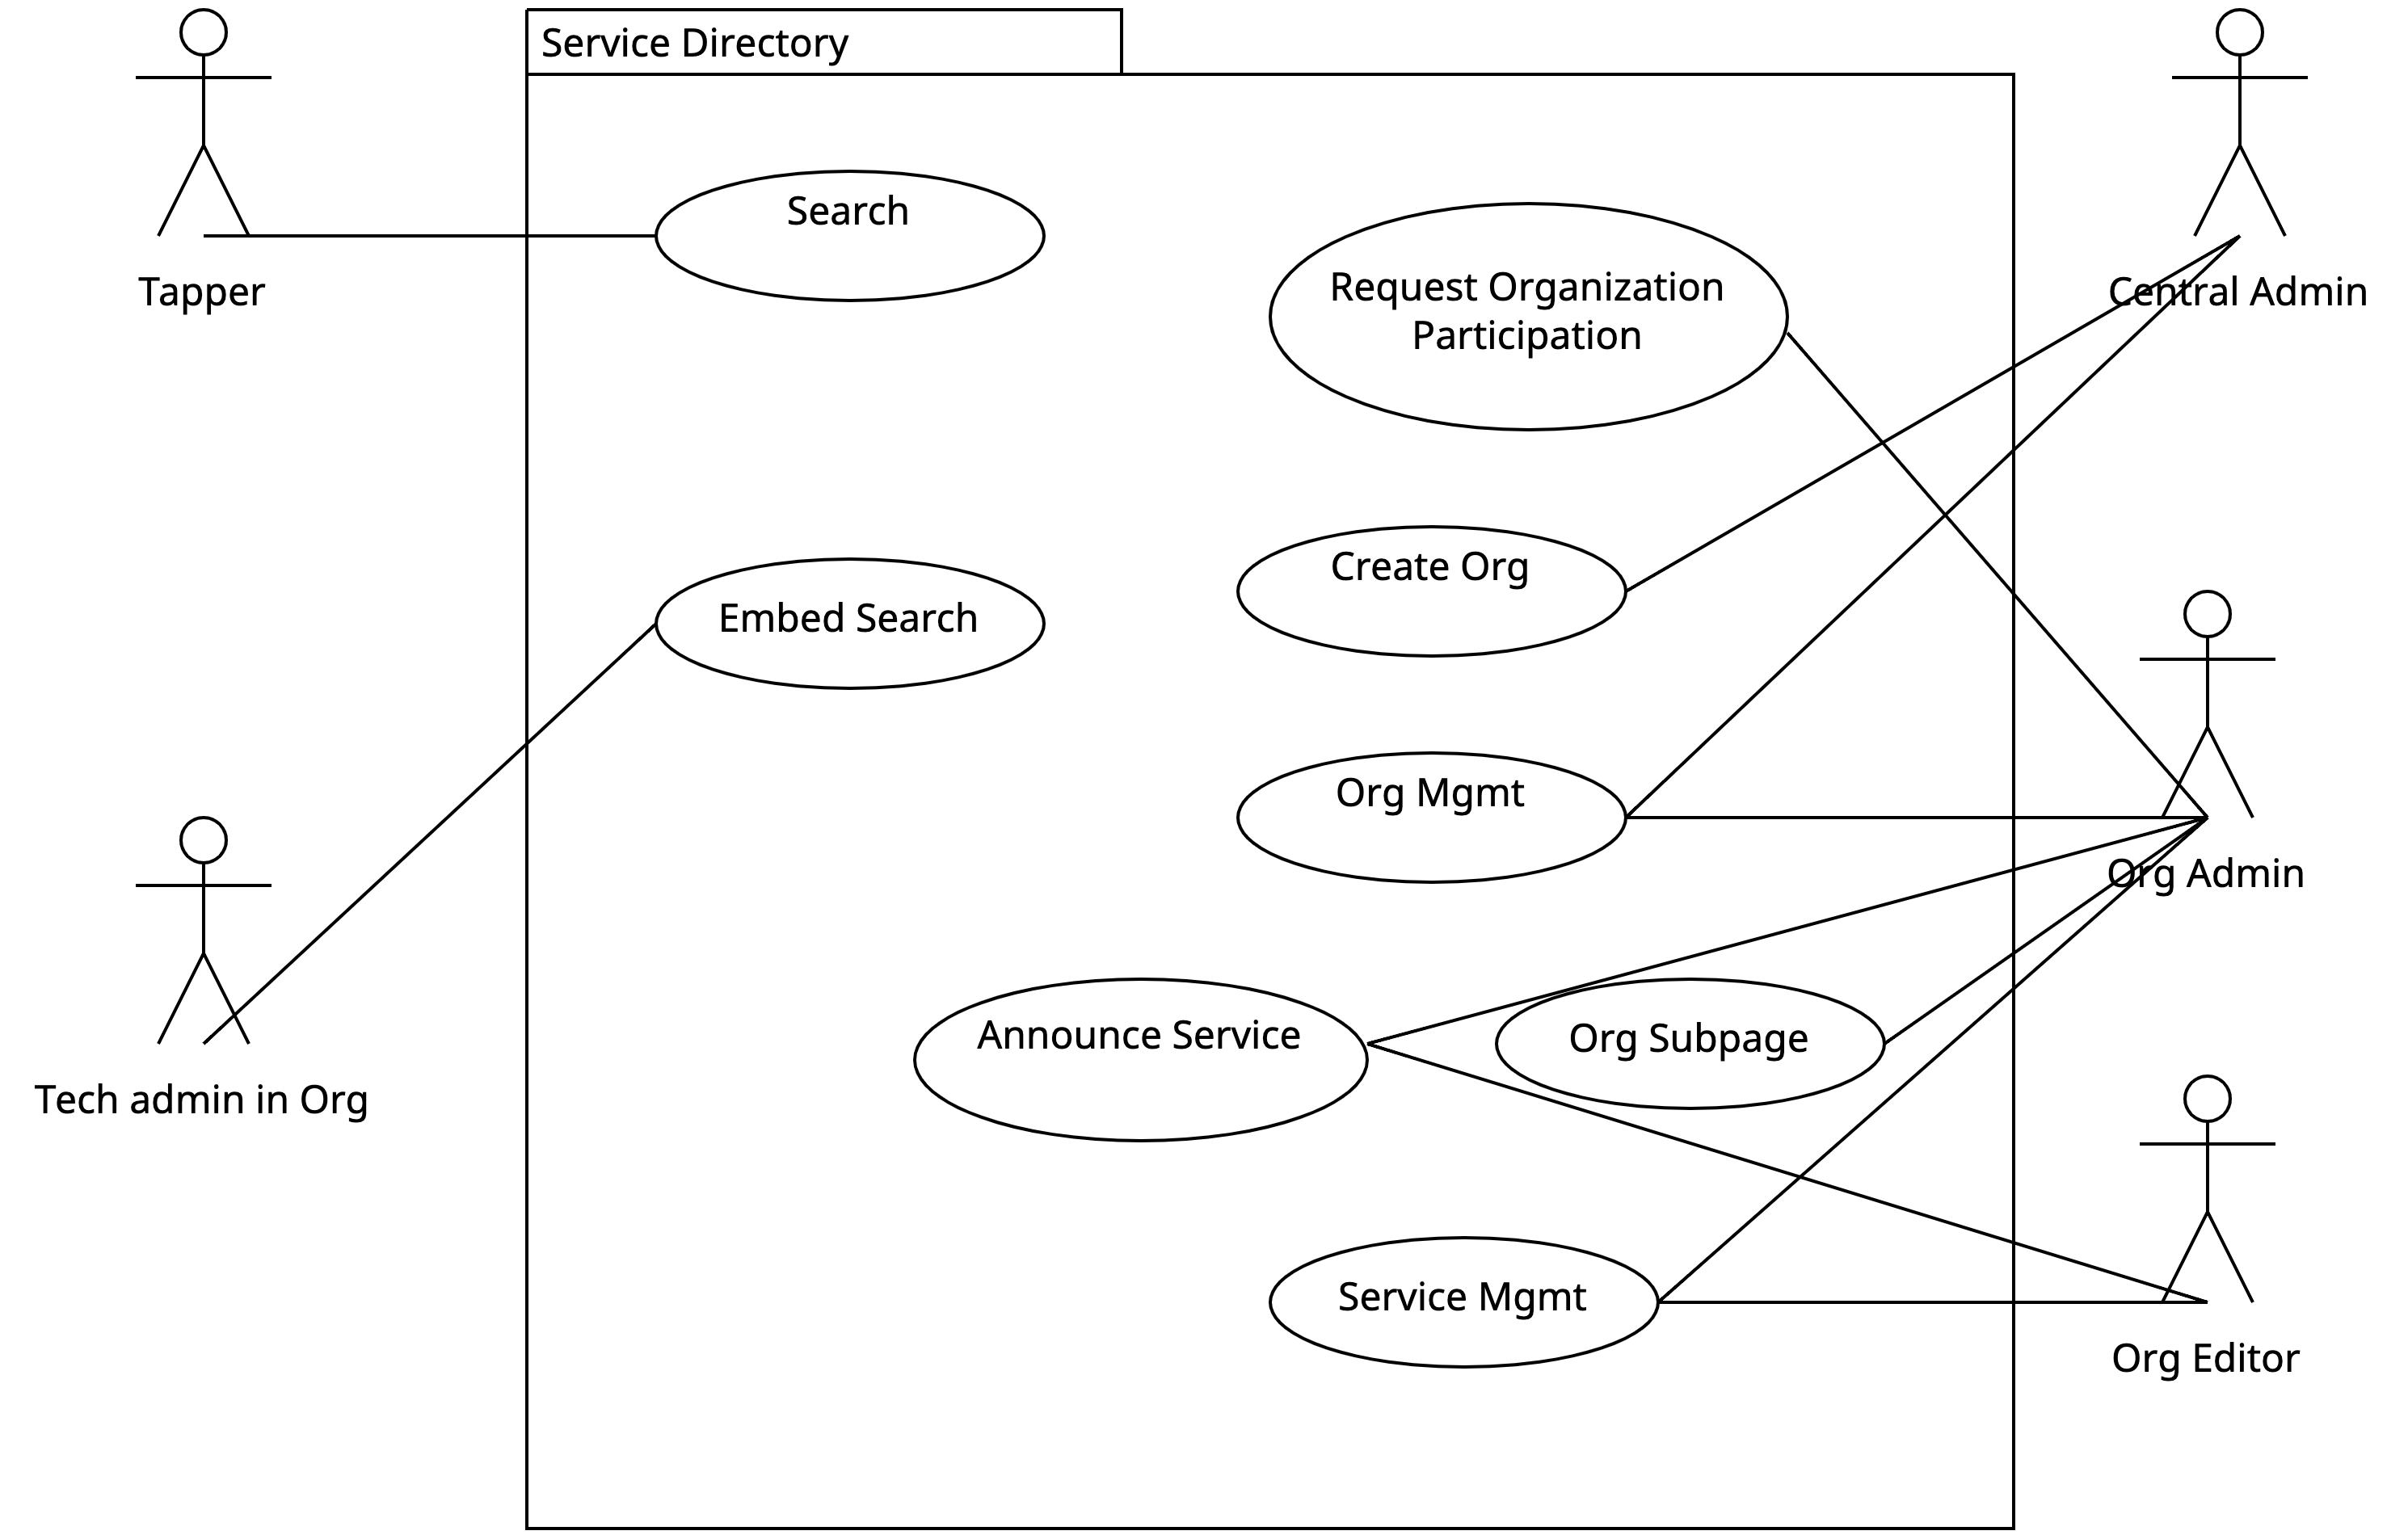 Use case diagram for service directory.